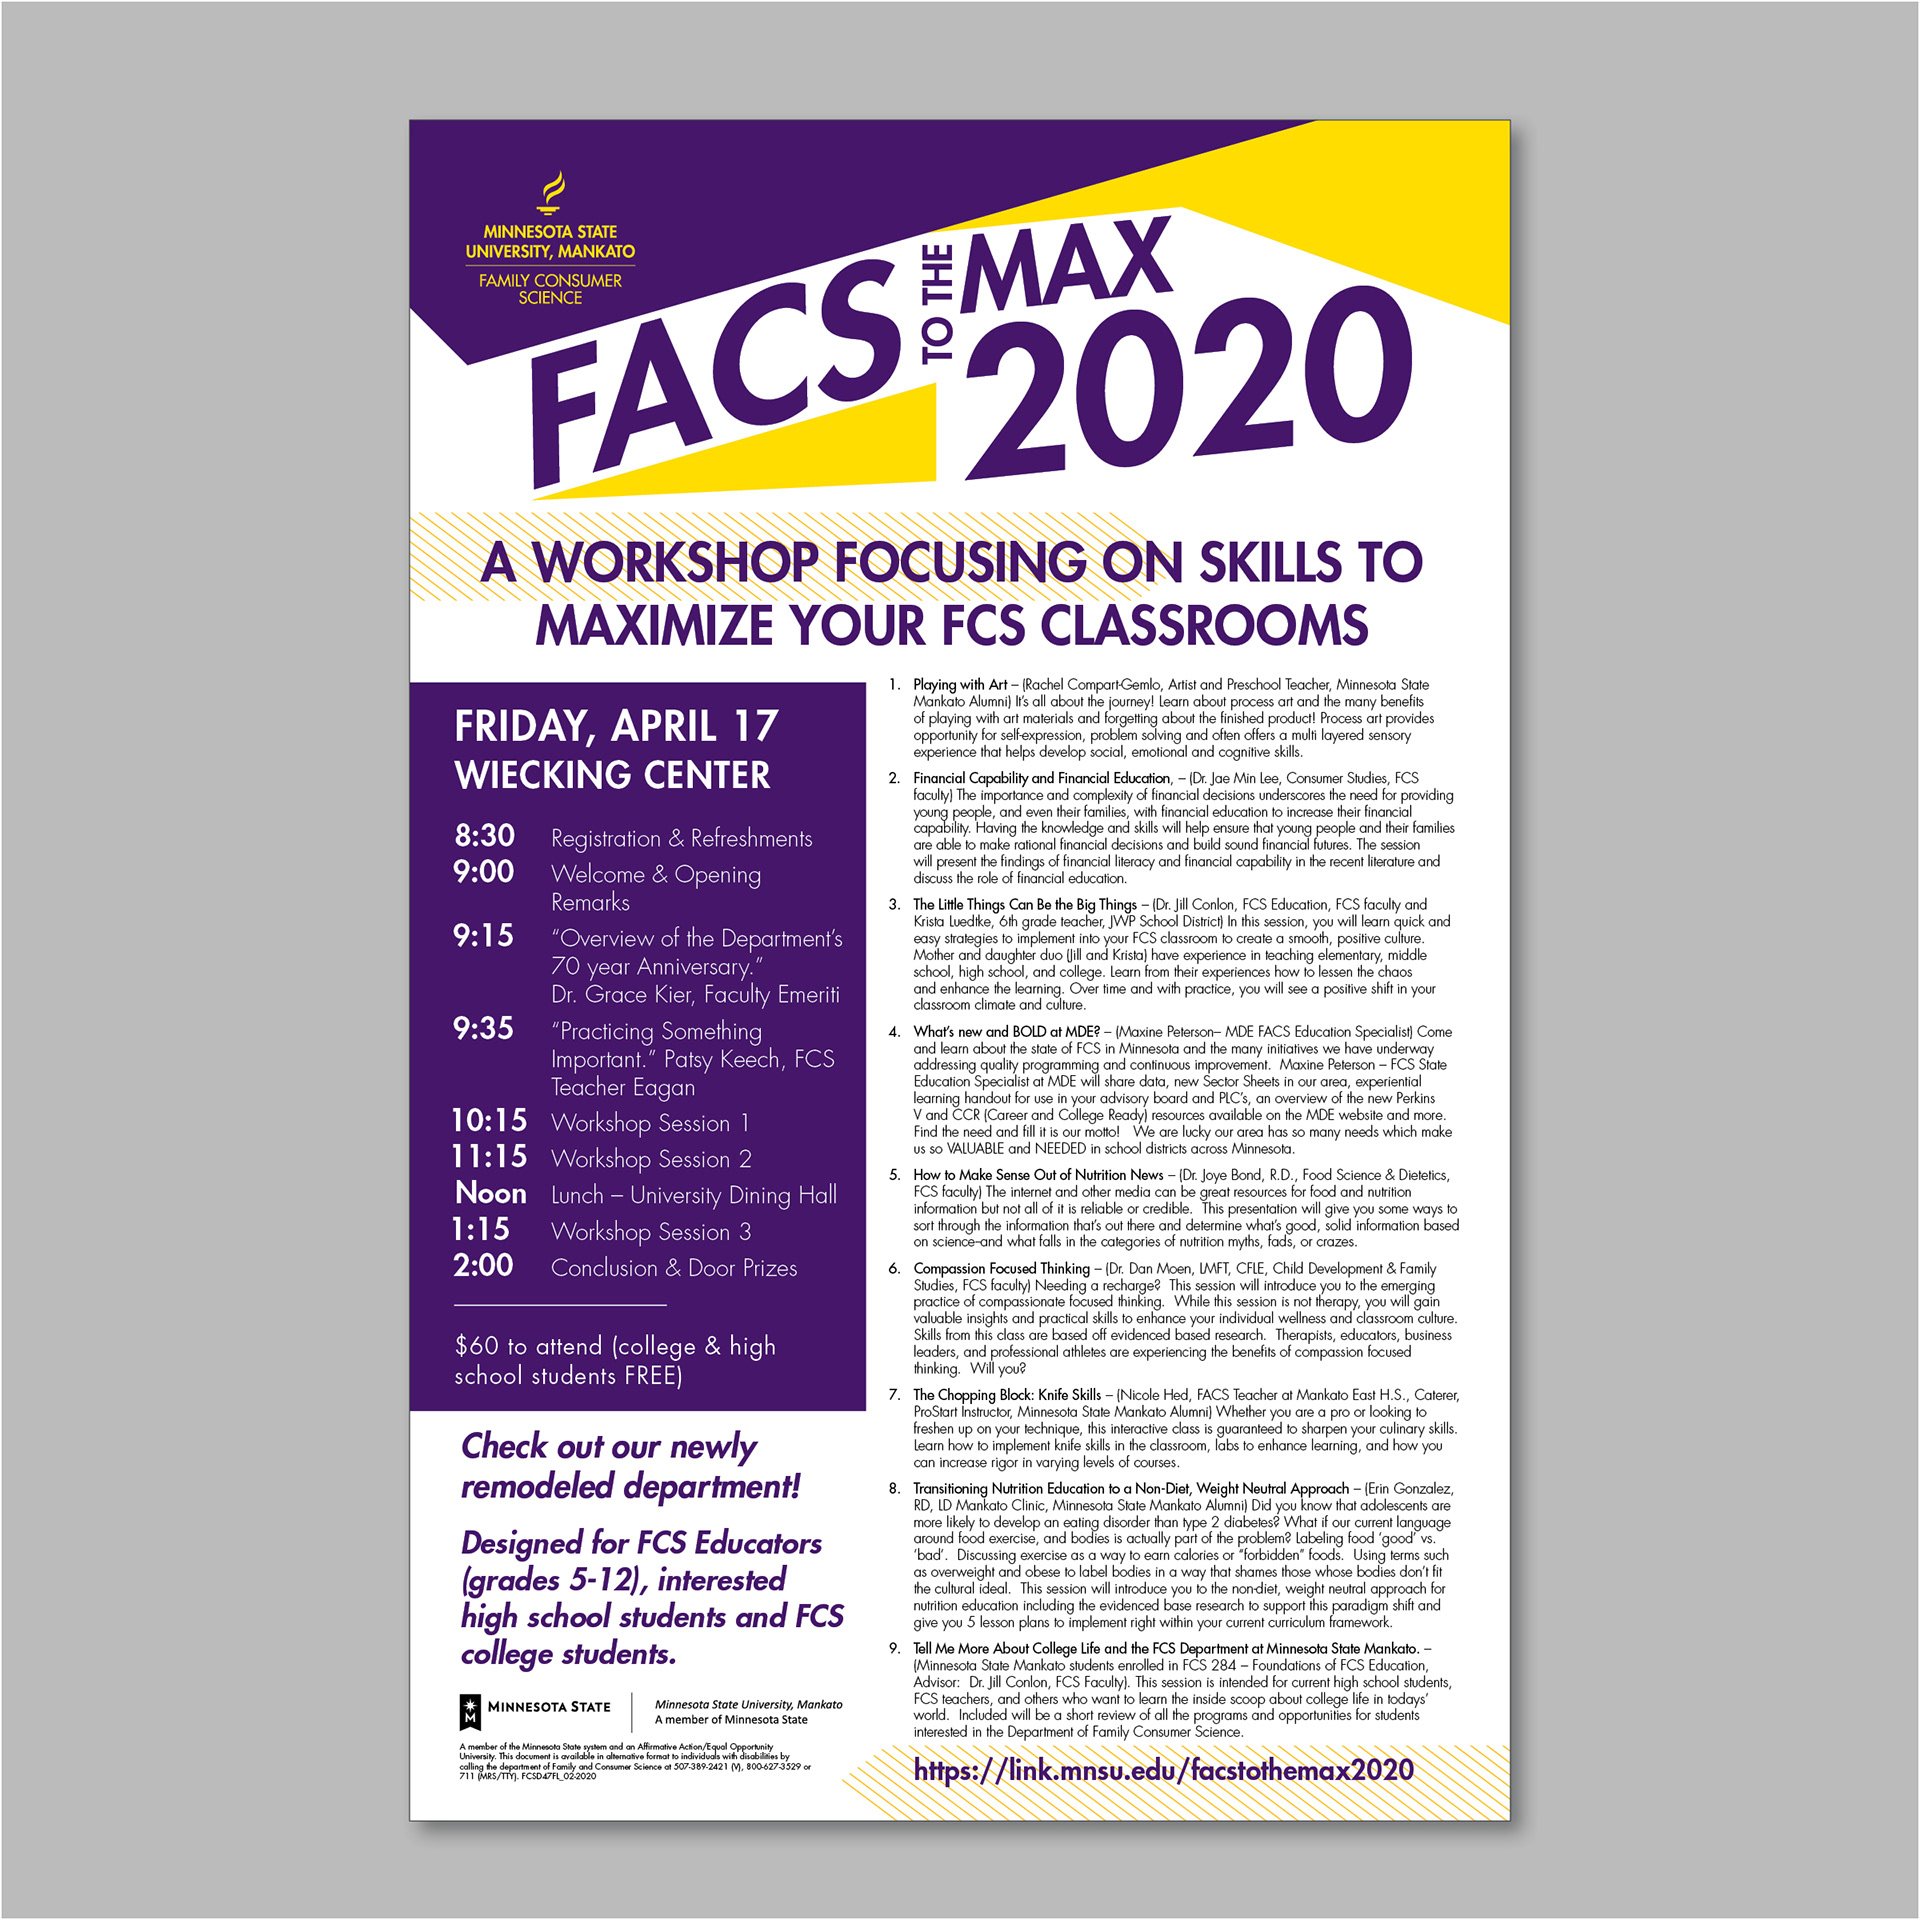 Facs to the max 2020, a workshop focusing on skills to maximize your fcs clasroom poster